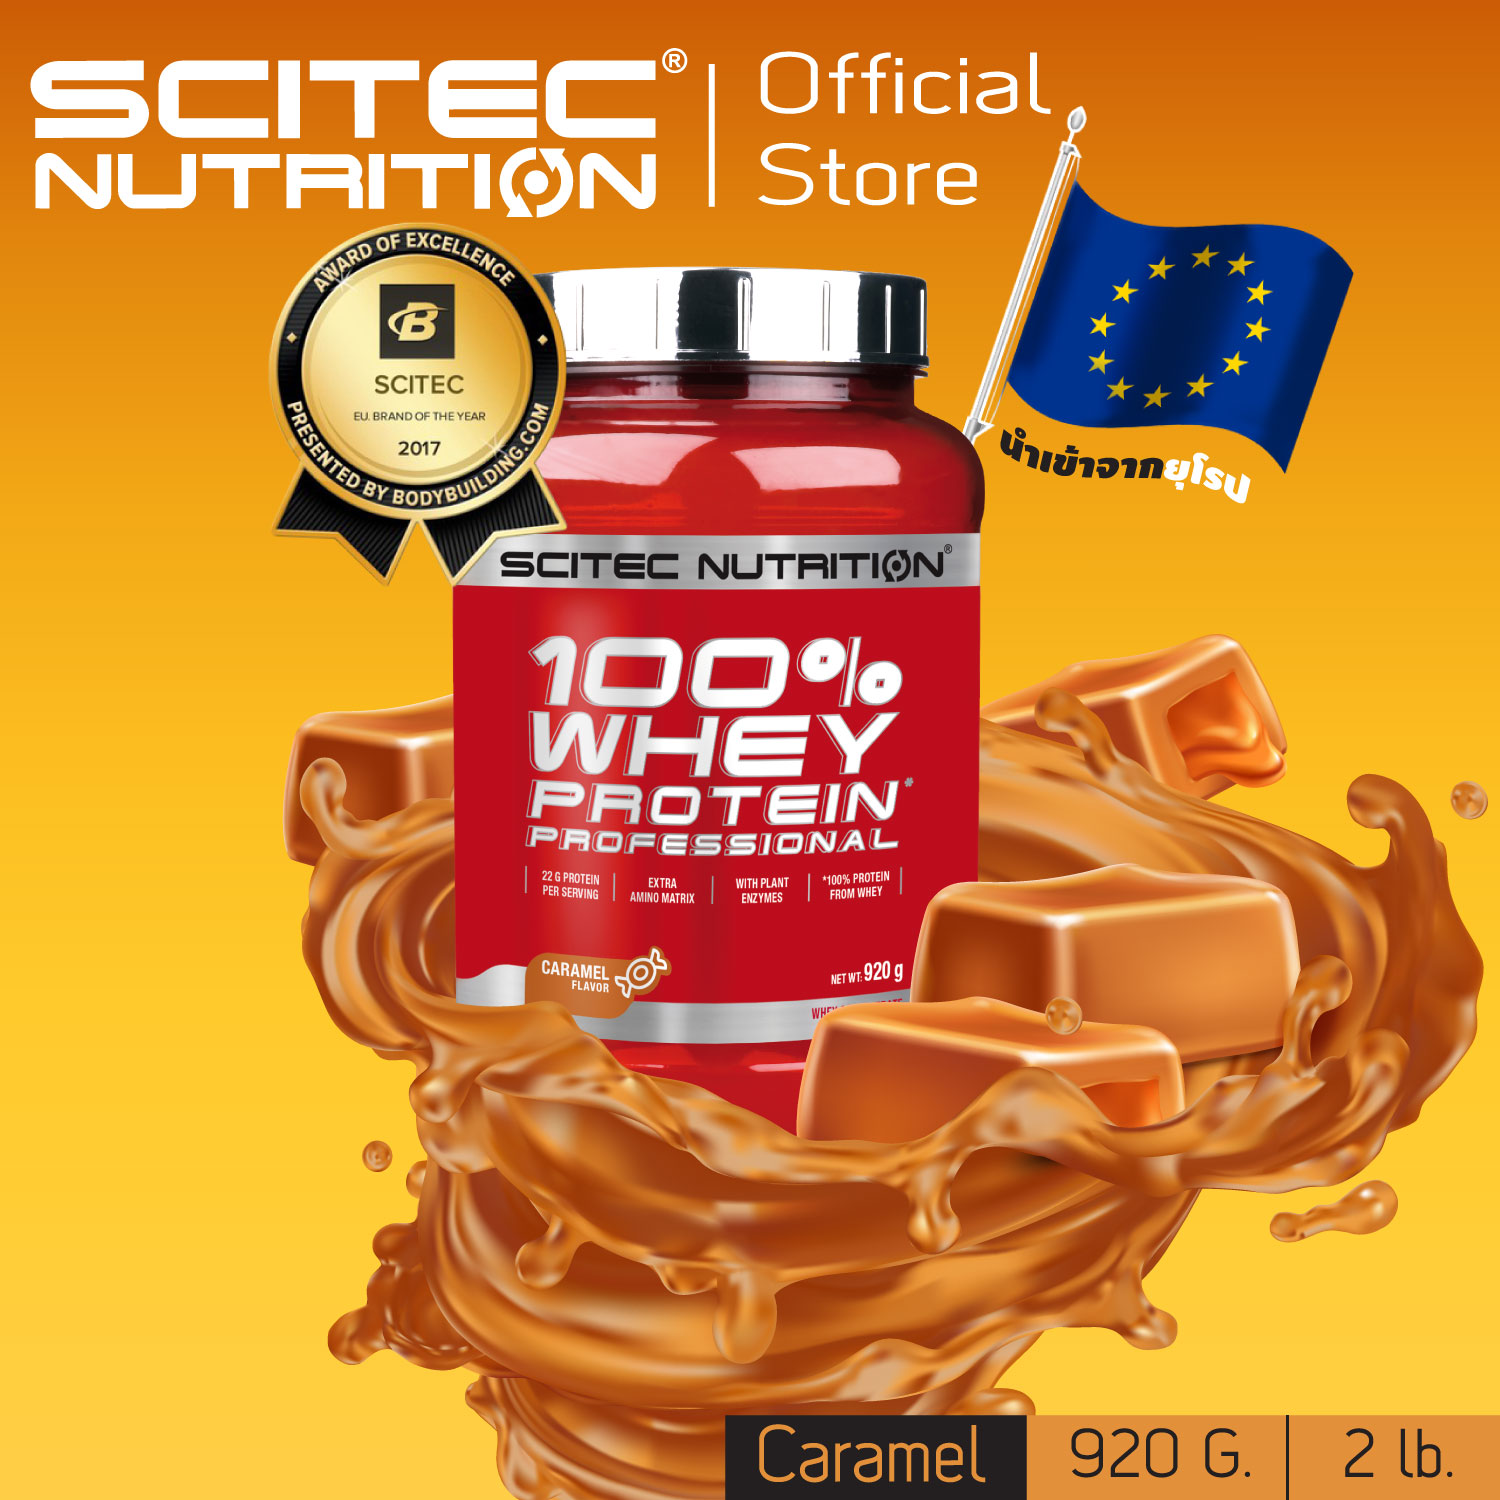 SCITEC NUTRITION Whey Protein , เวย์โปรตีน (100%Whey Protein Caramel 920g)  เวย์โปรตีนสูตรเพิ่มกล้ามเนื้อ